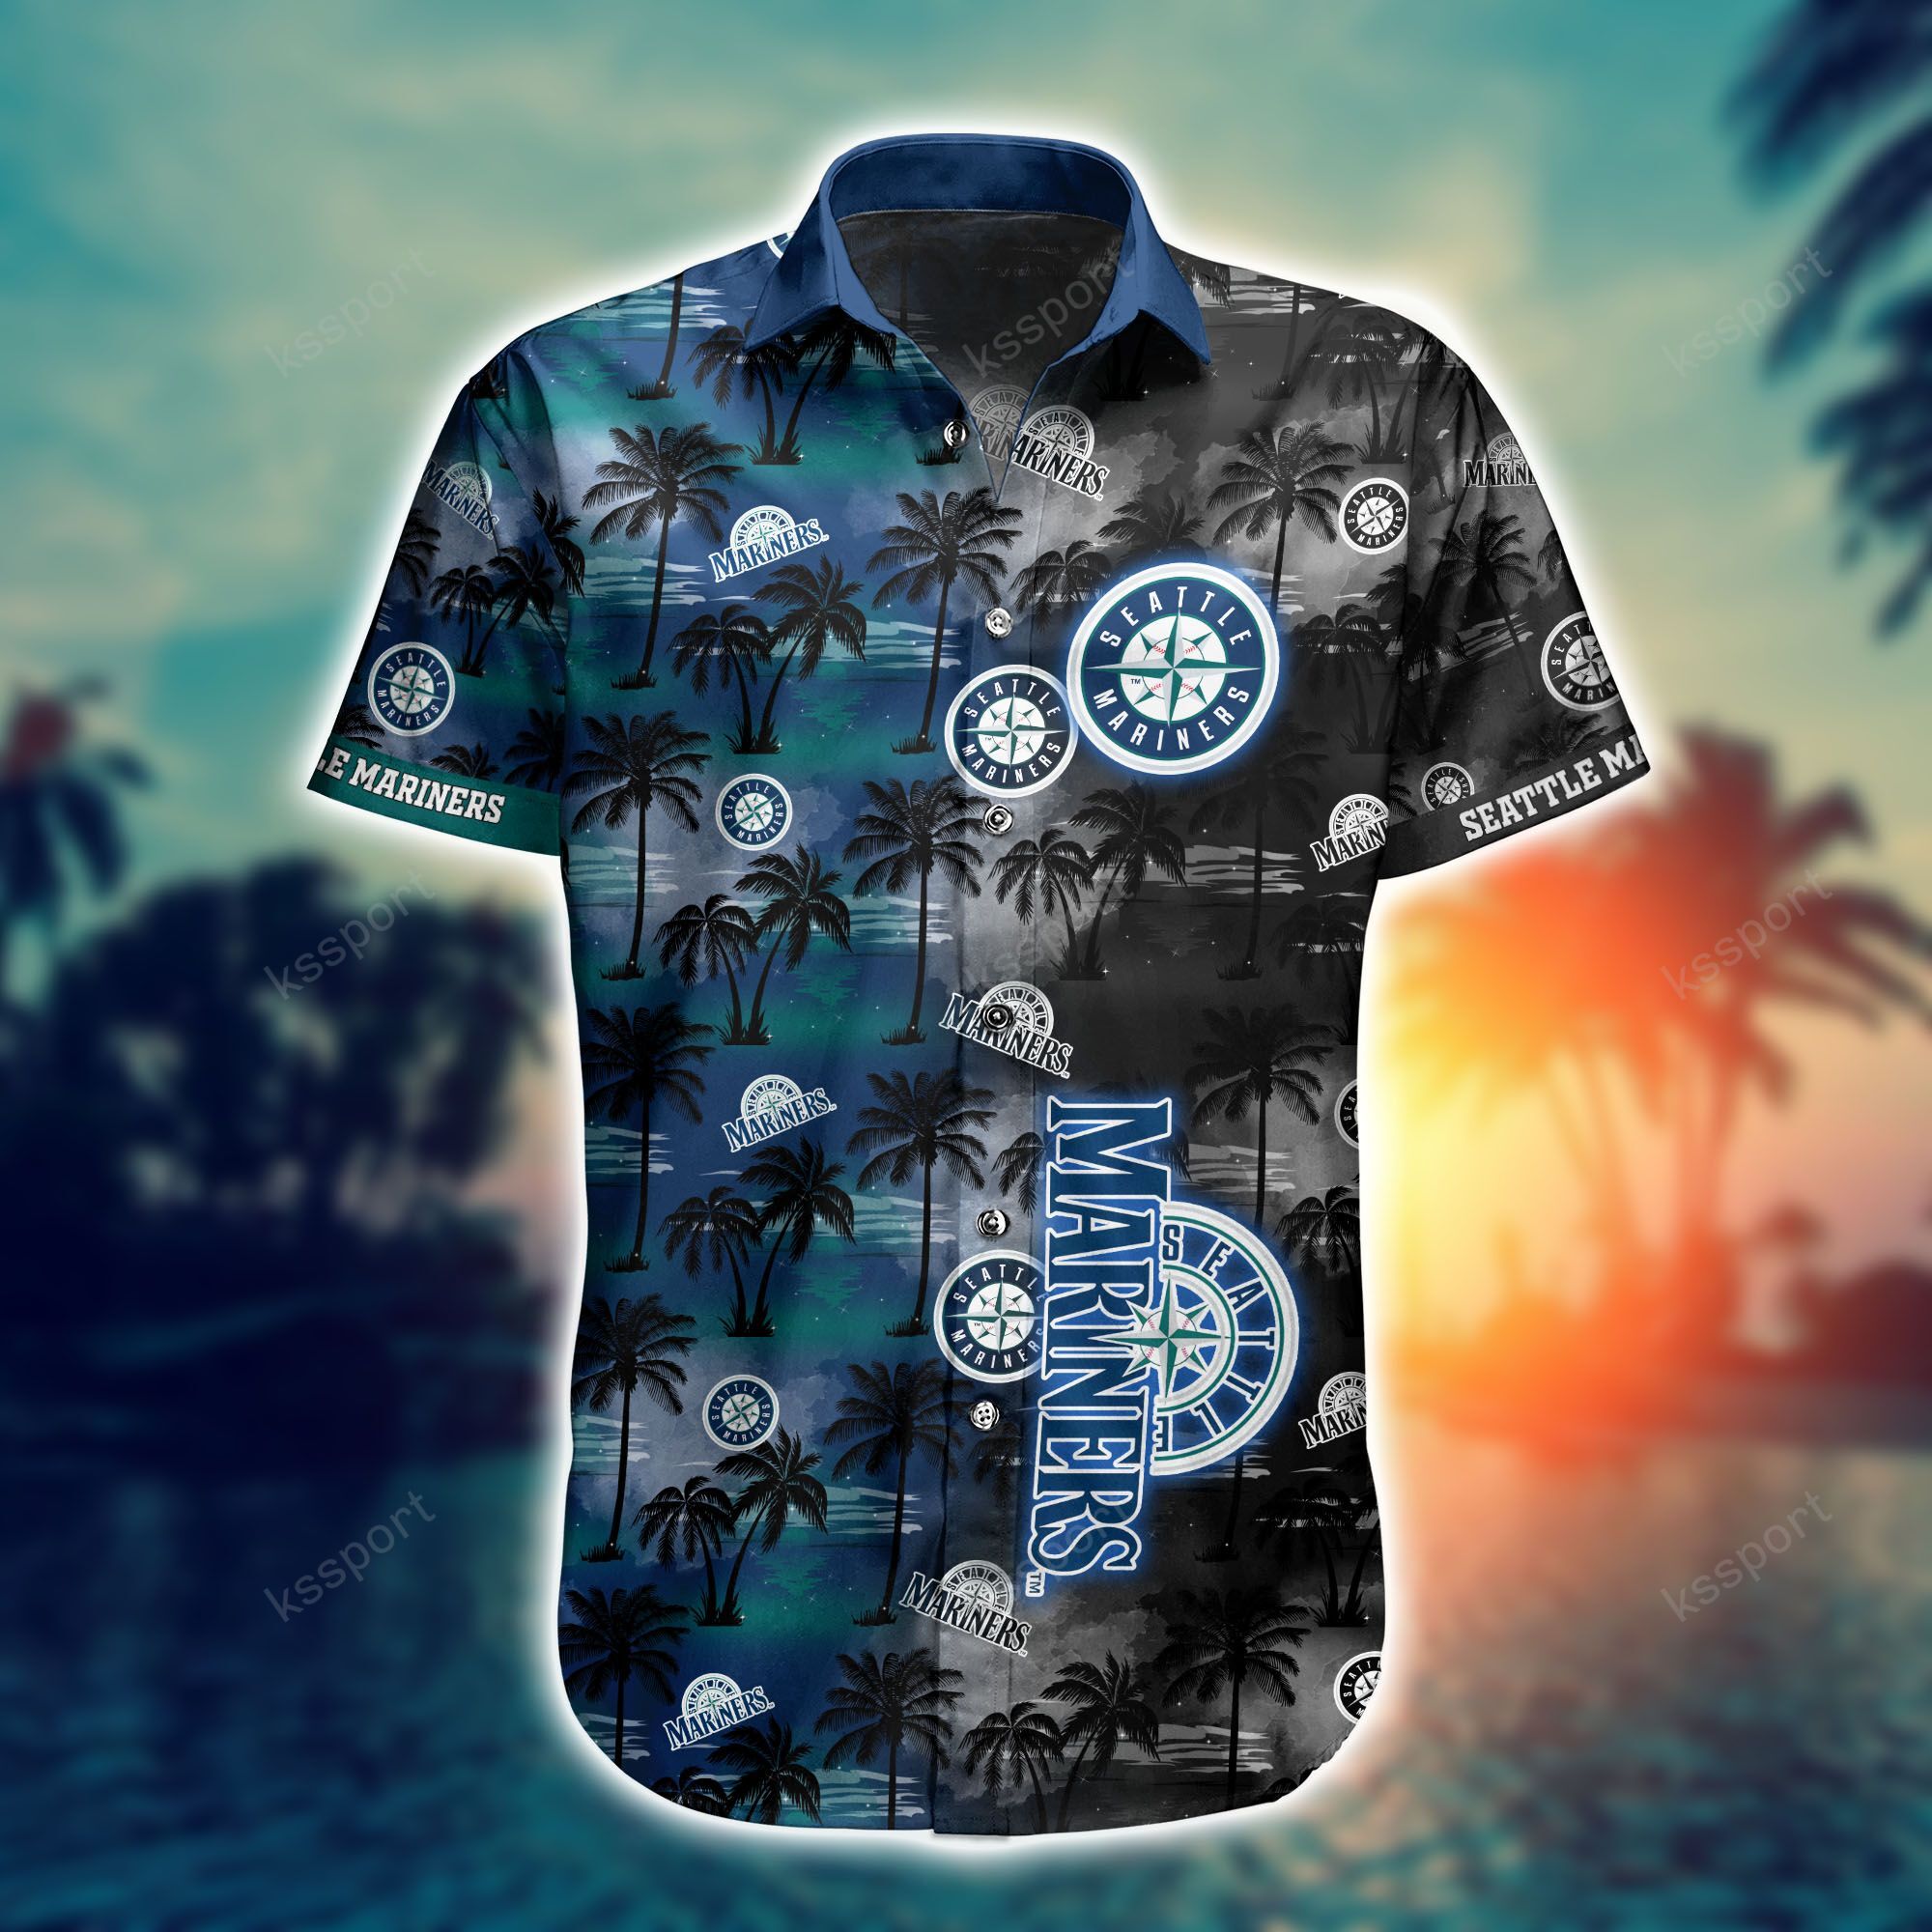 Top cool Hawaiian shirt 2022 - Make sure you get yours today before they run out! 114